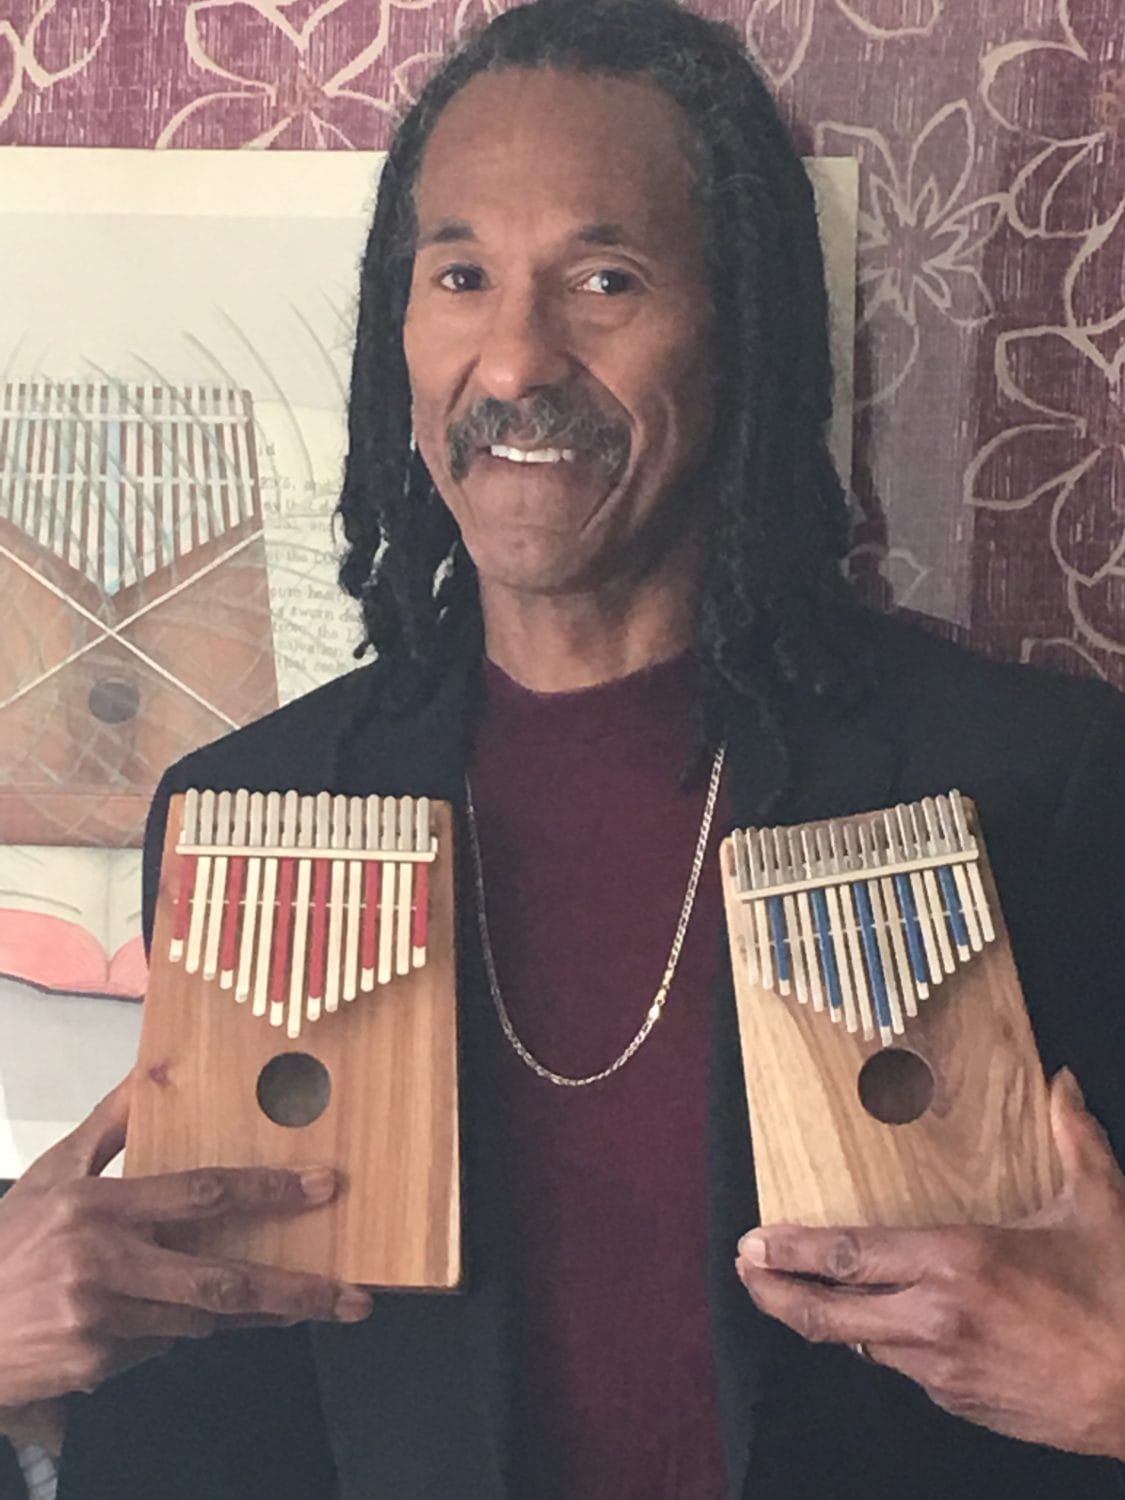 Kalimba-King-Carl-Winters-holds-two-kalimbas, Kalimba King Carl Winters provides the sound track for Black History Month, Culture Currents 